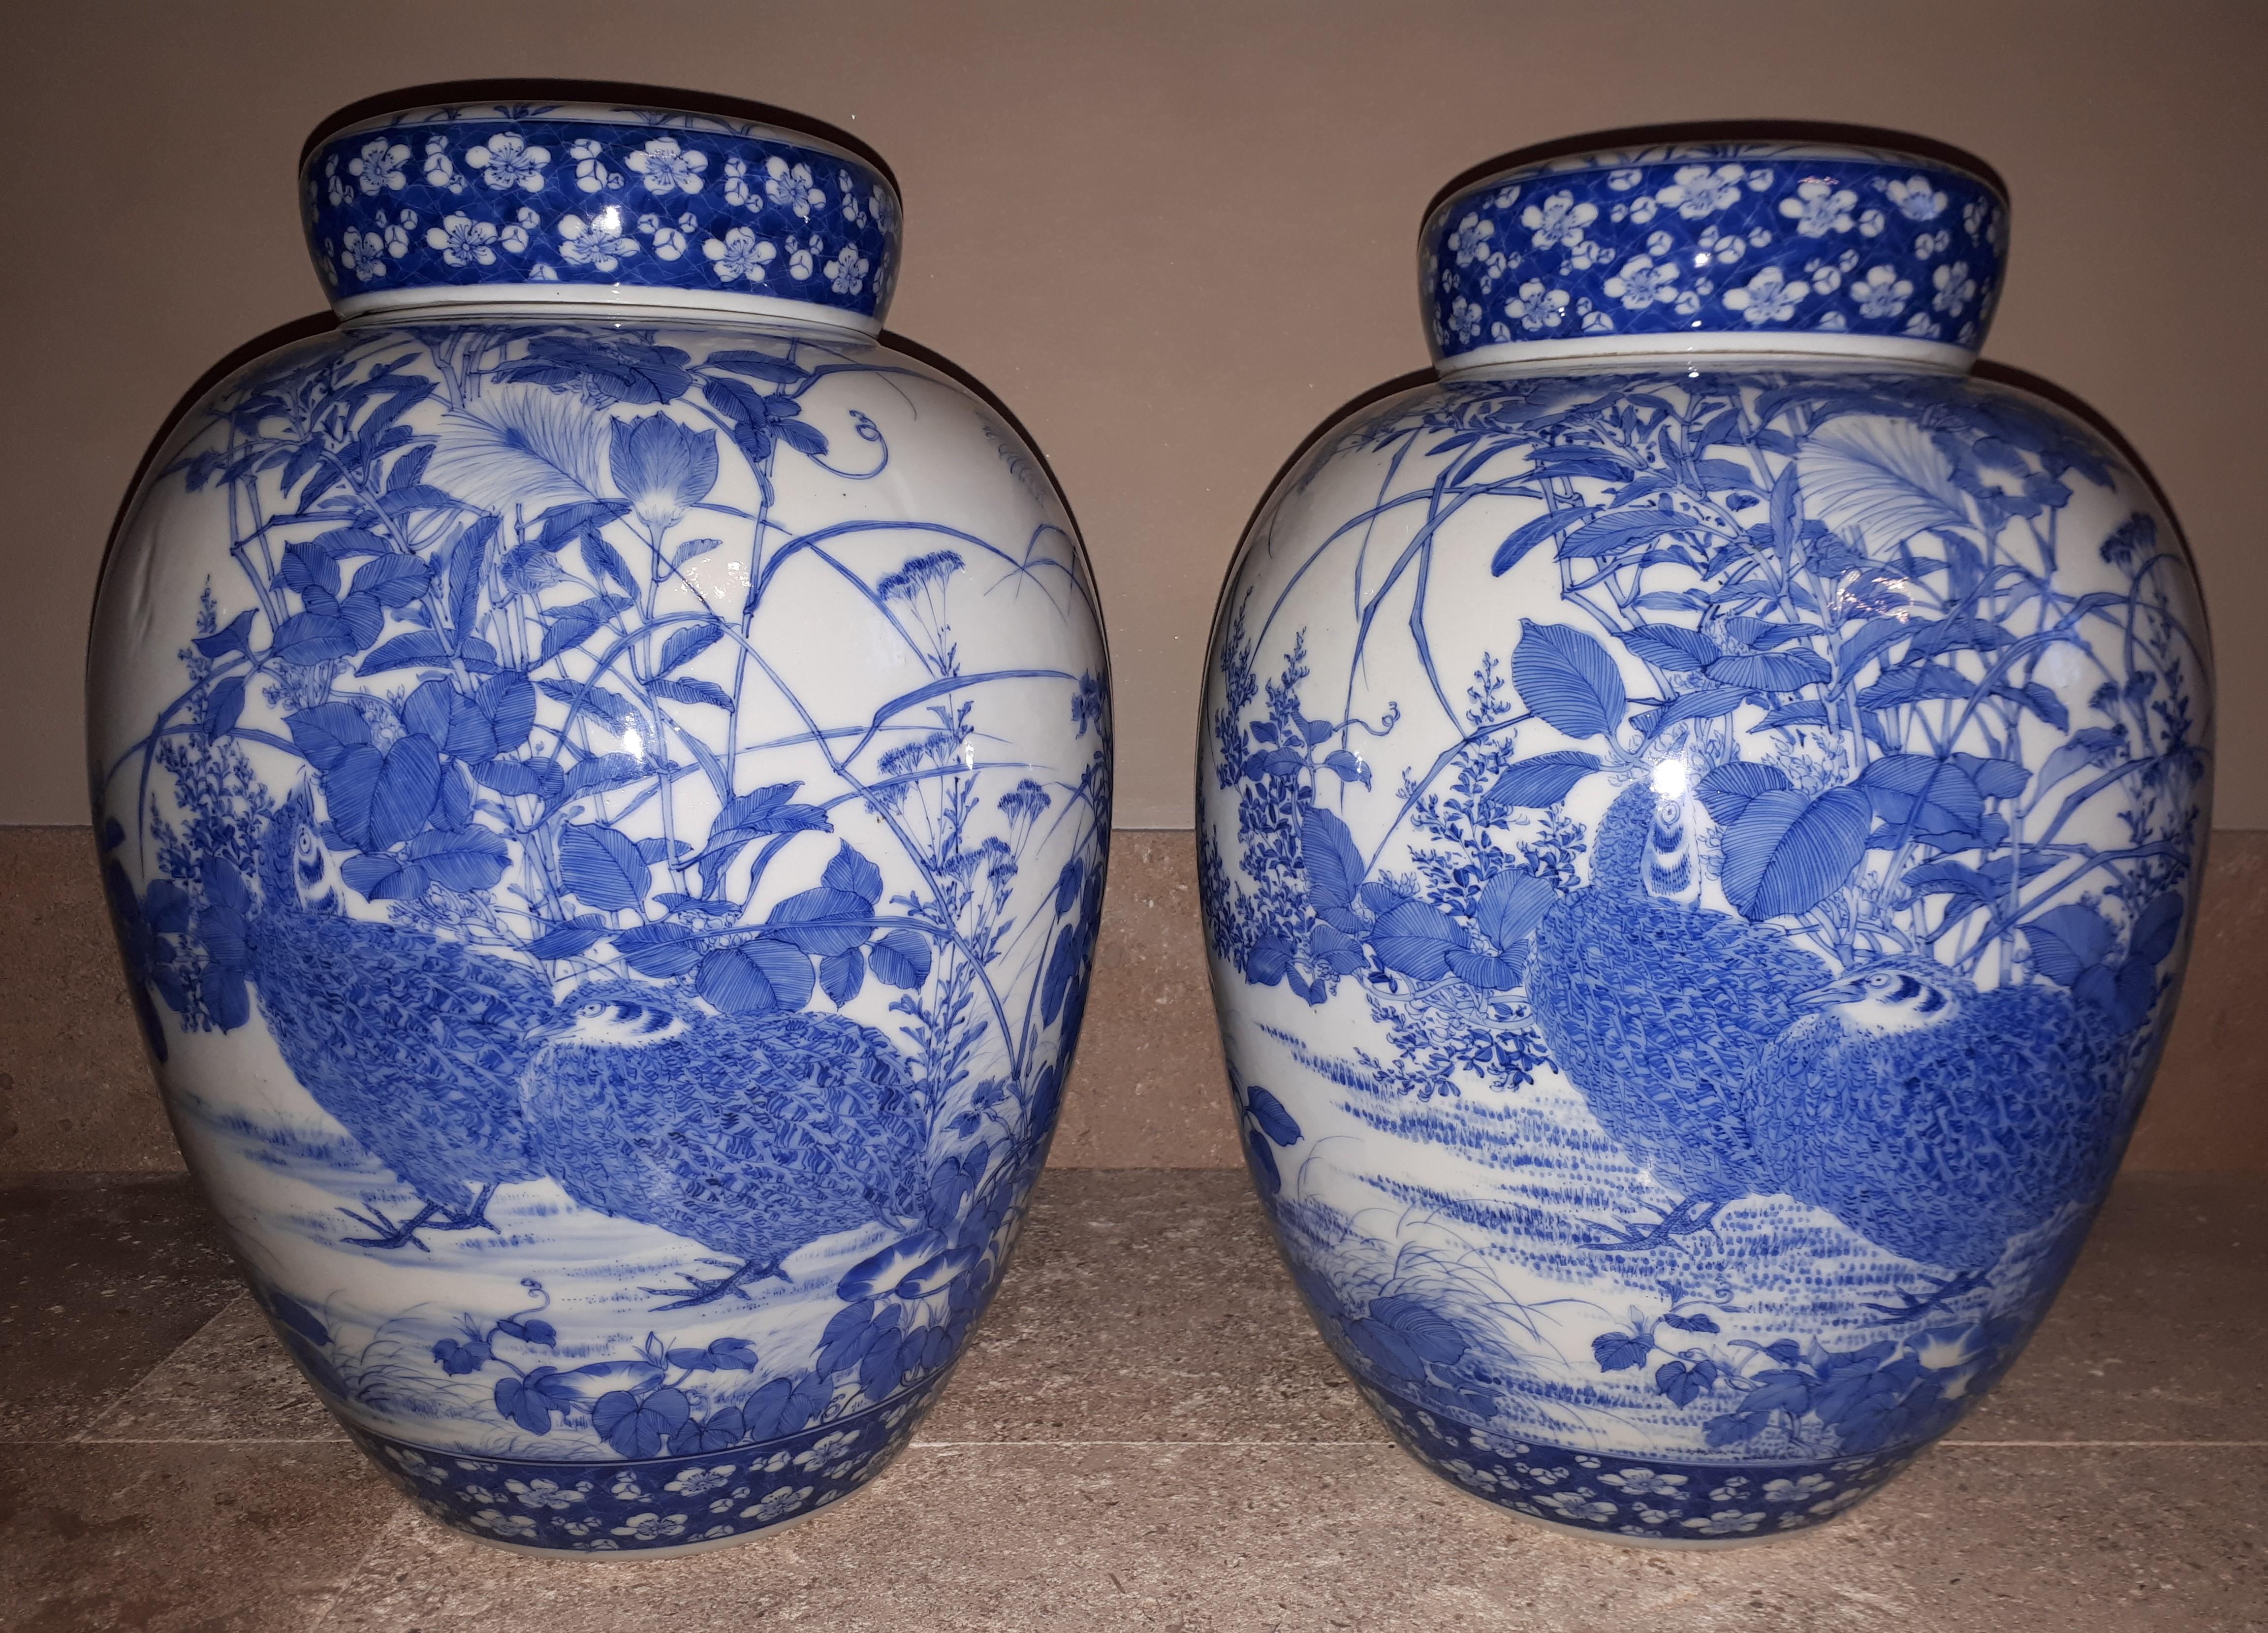 Magnificent pair of porcelain vases with a rich underglaze blue decoration of a couple of partridges among the vegetation. A minimal defect on each interior lid in the shape of a stylized lotus flower (a tiny hair on one, a small piece glued on the